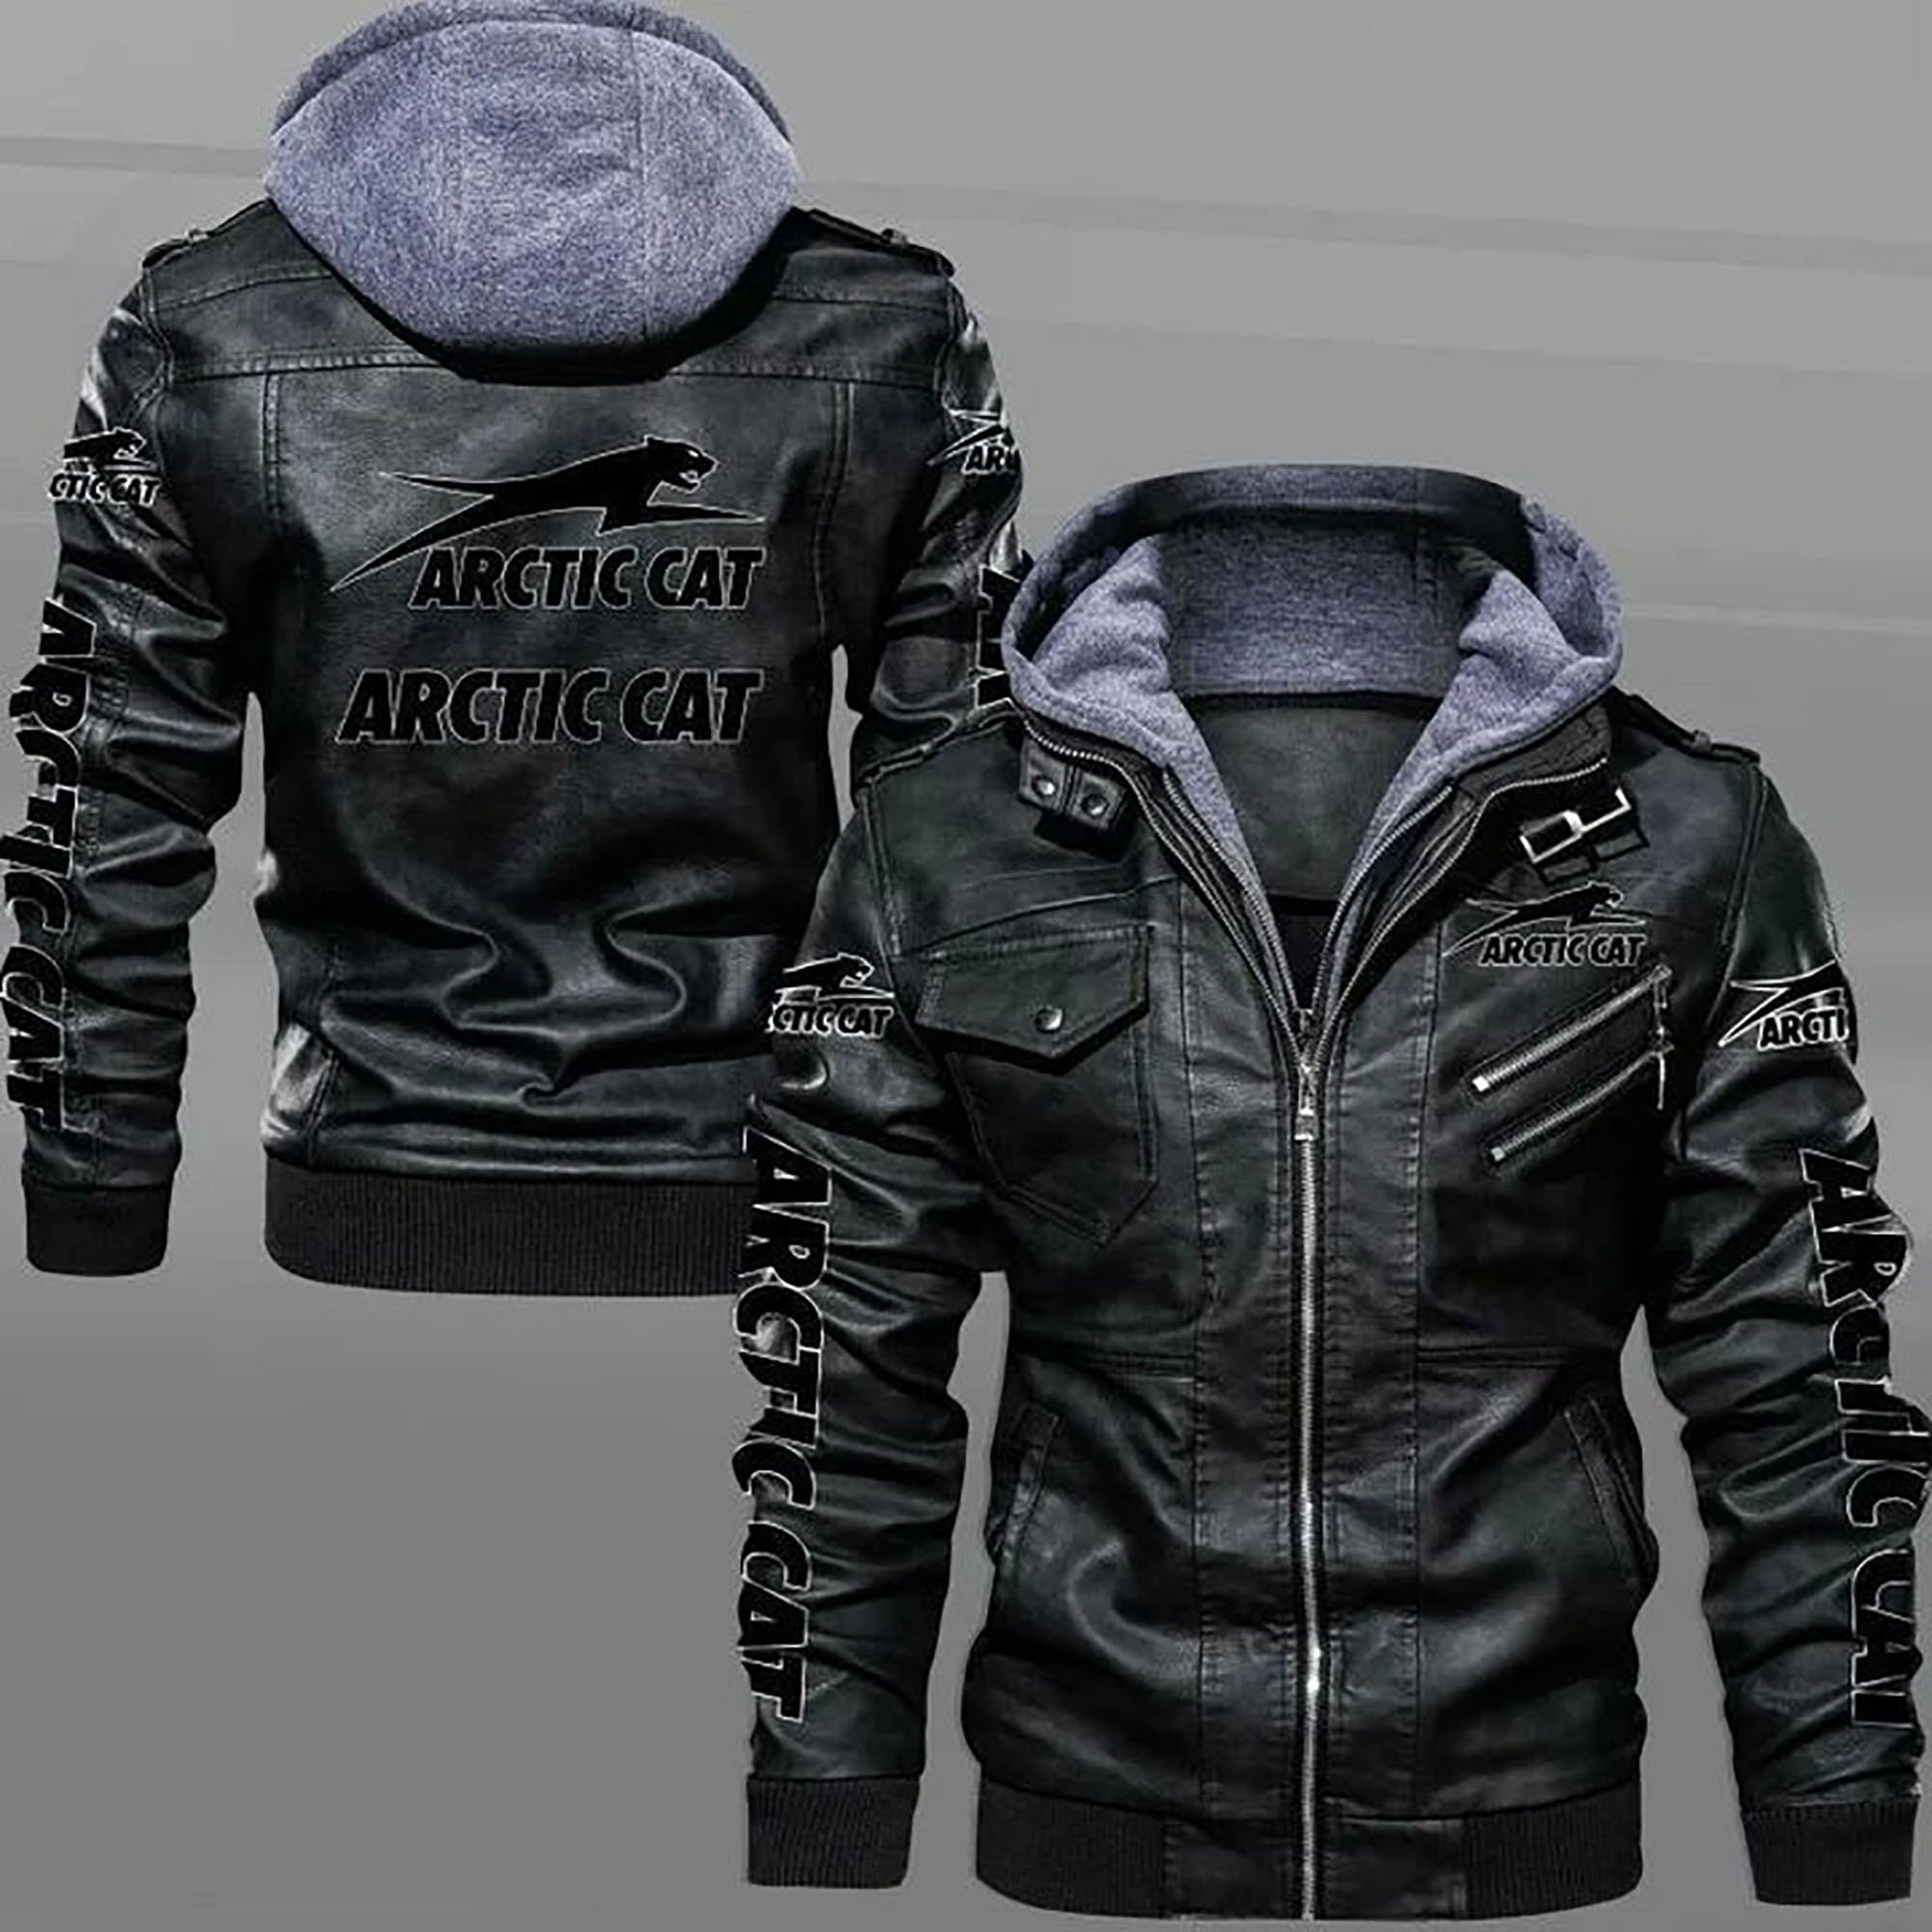 These Amazing Leather Jacket will add to the appeal of your outfit 435